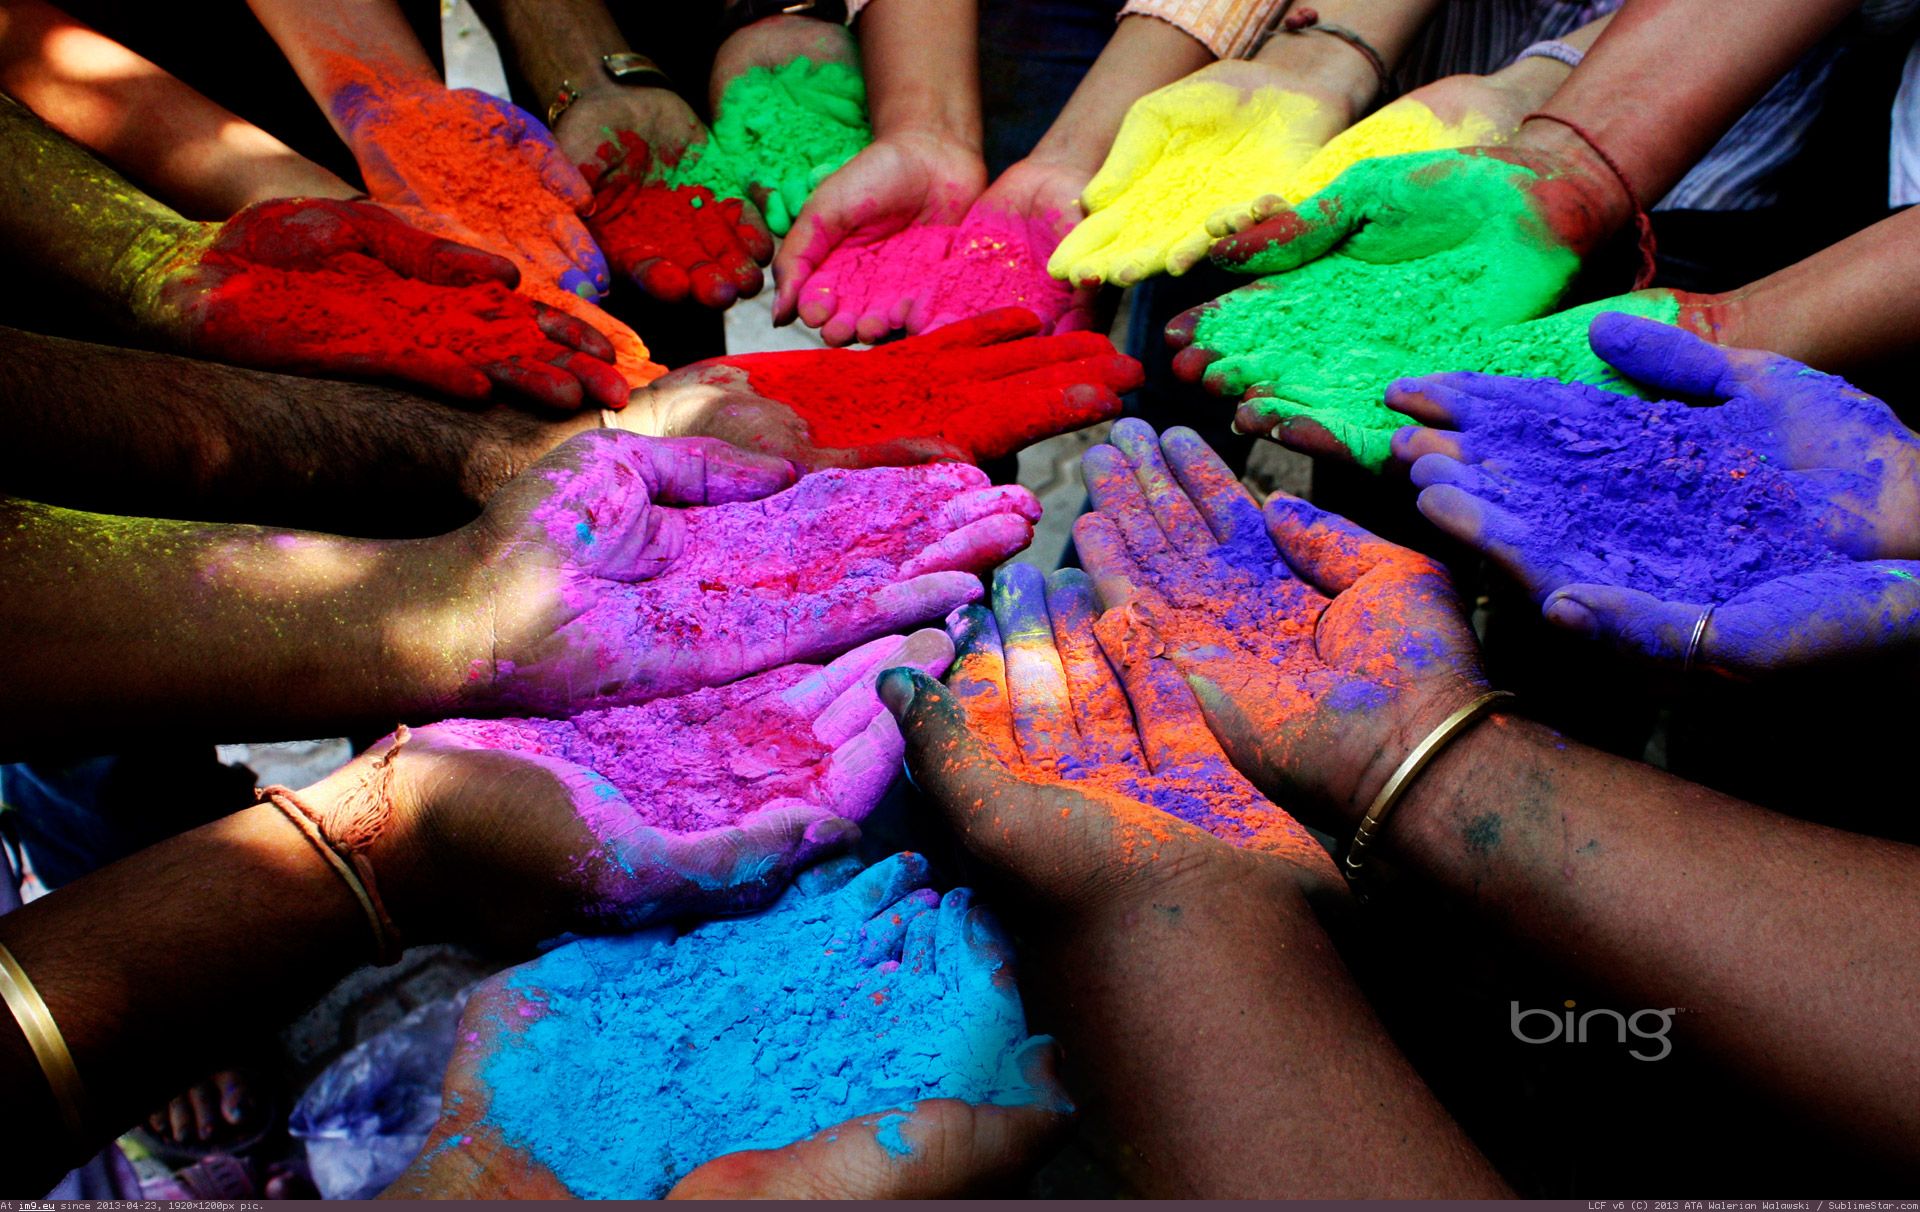 http://p.im9.eu/people-holding-powder-paints-to-celebrate-holi-festival-of-colors-in-ahmedabad-india-corbis-2013-03-27.jpg